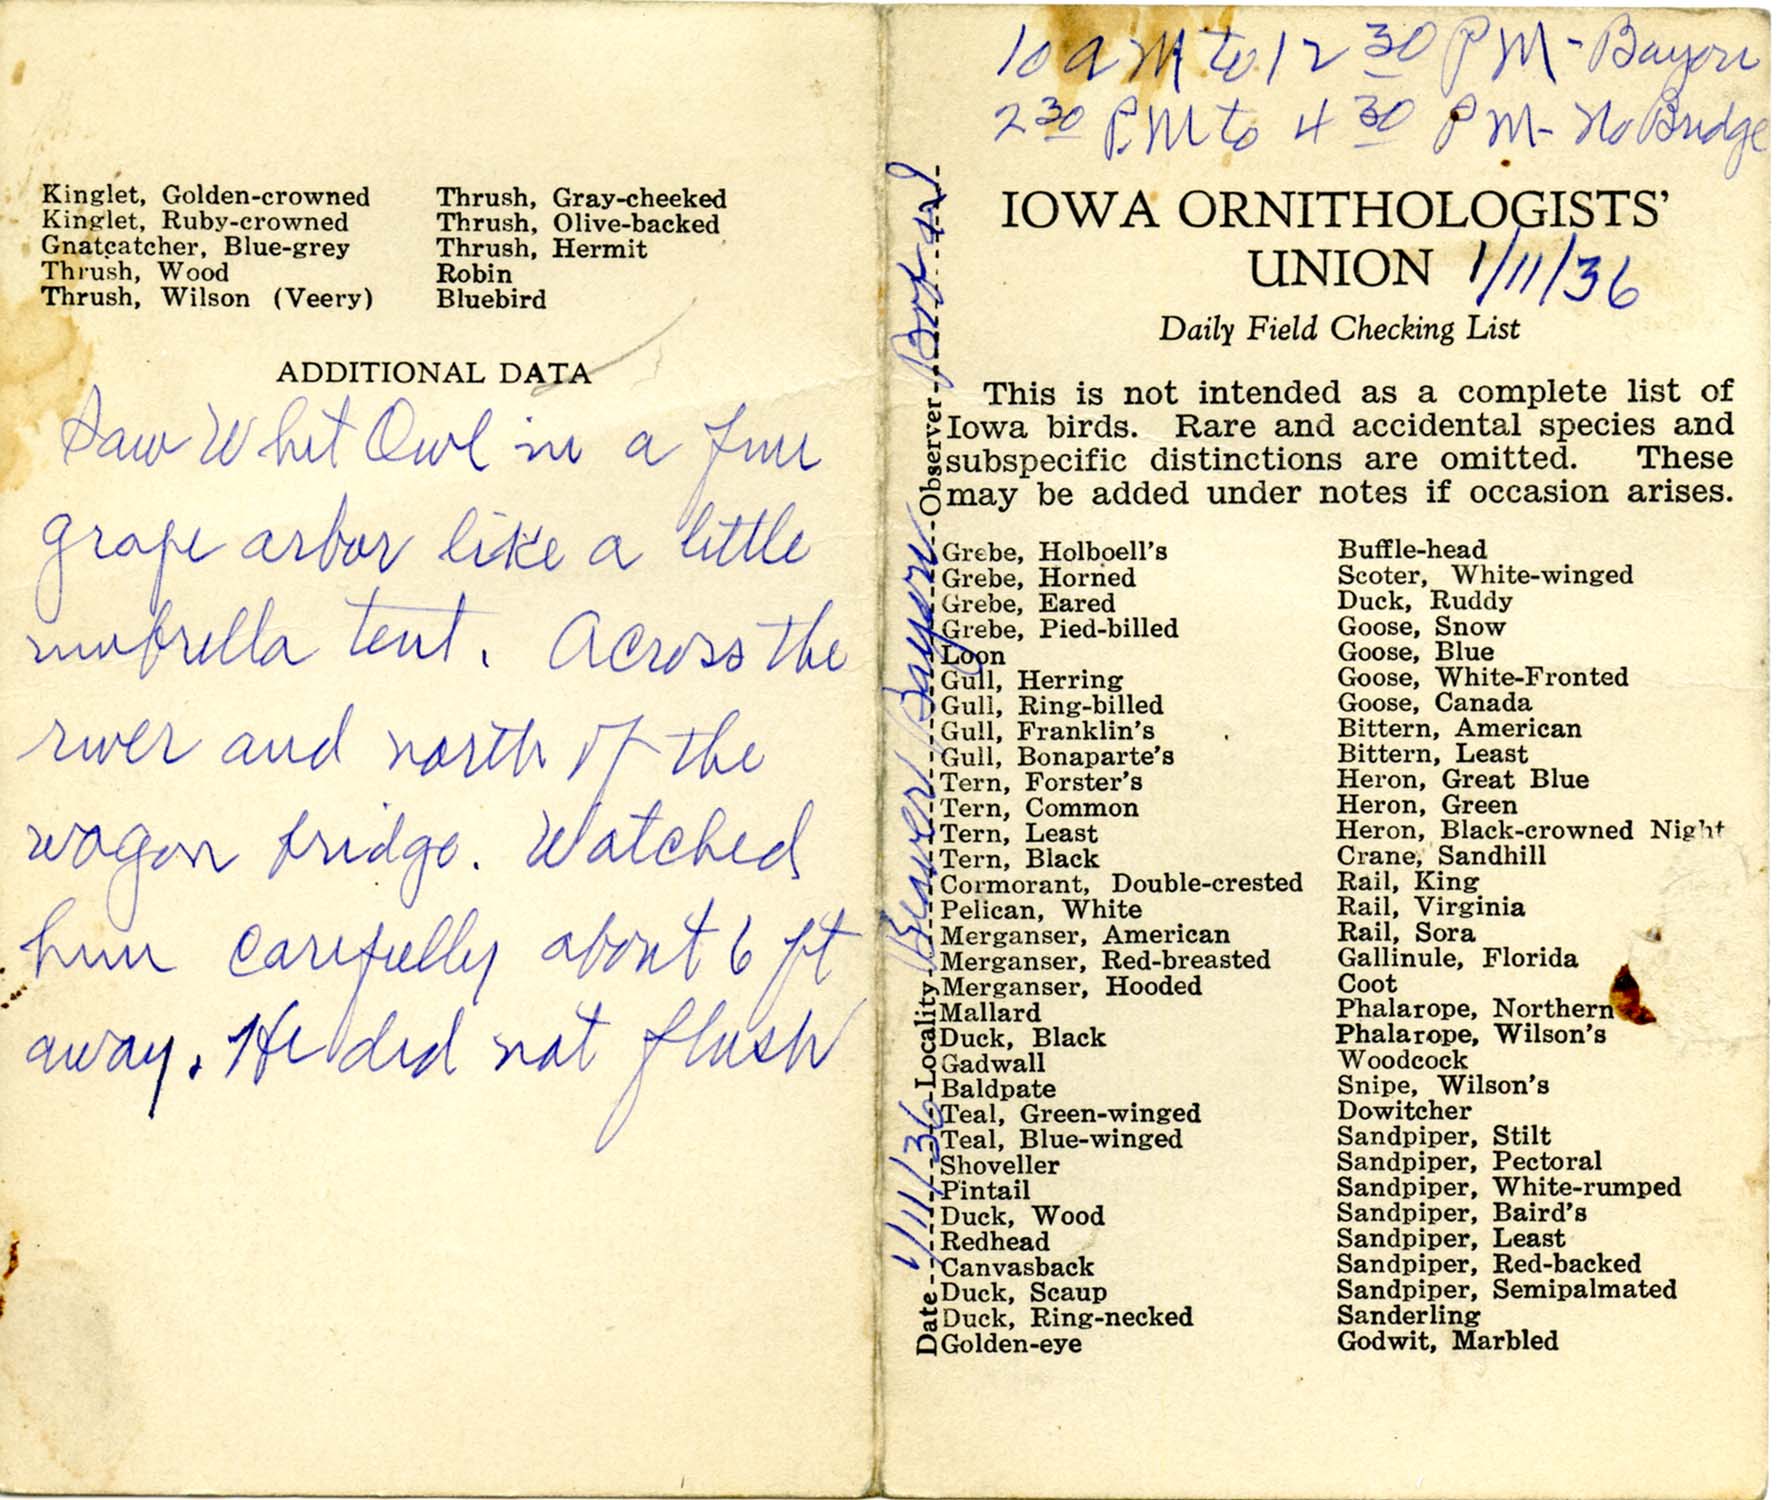 Daily field checking list by Walter Rosene, January 11, 1936